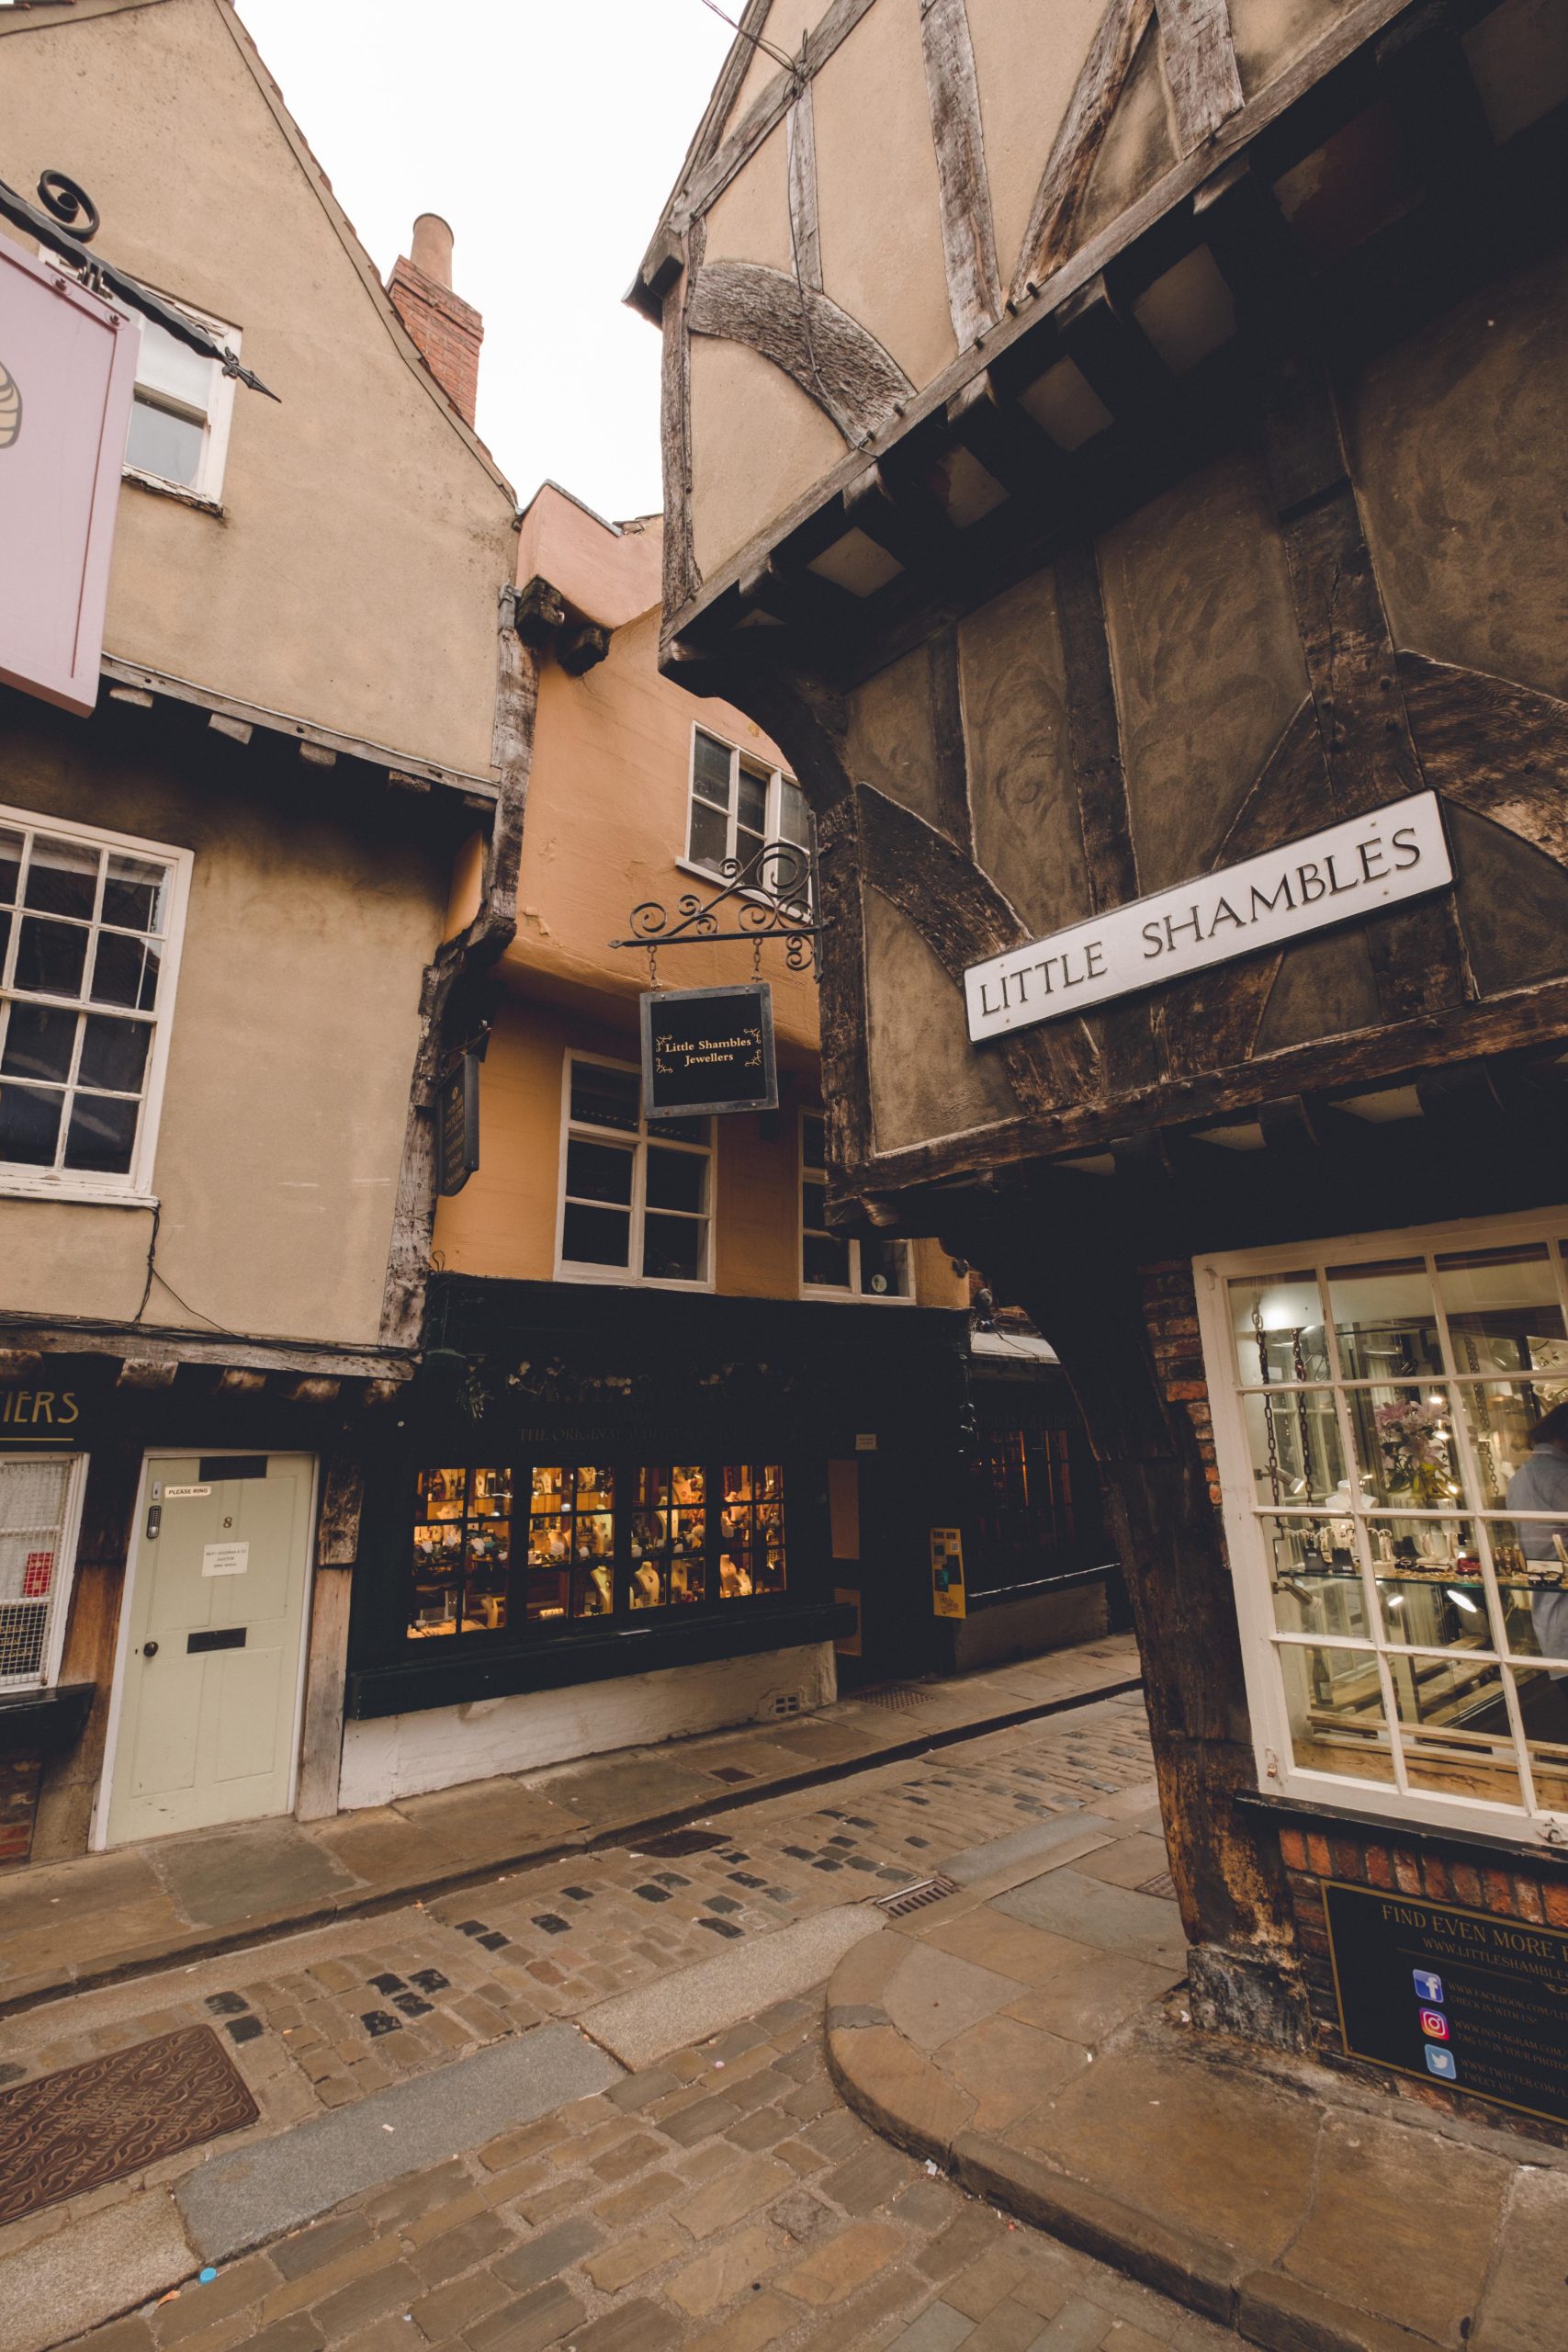 The Shambles in York England